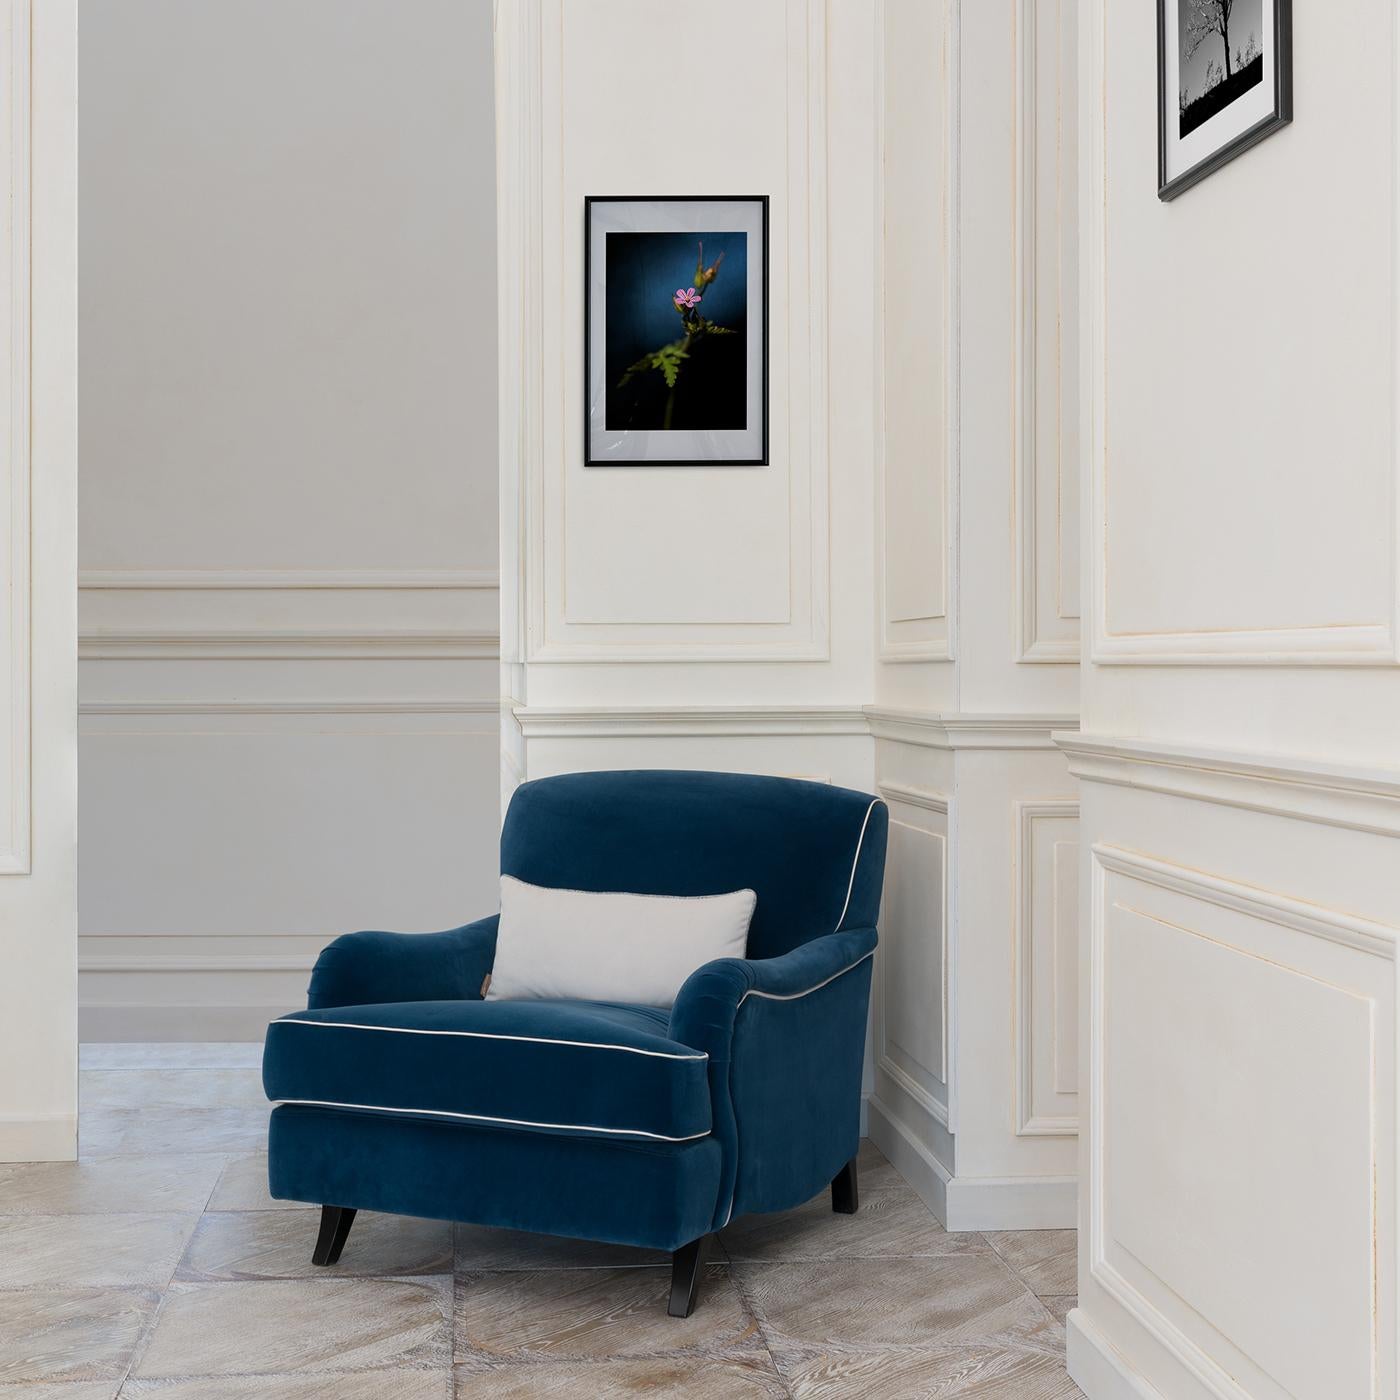 Any room will gain a touch of class with this English-inspired armchair from the Couture collection. This sophisticated chair is upholstered in plush, dark blue fabric with contrasting white piping and has a plush seat cushion and backrest and low,